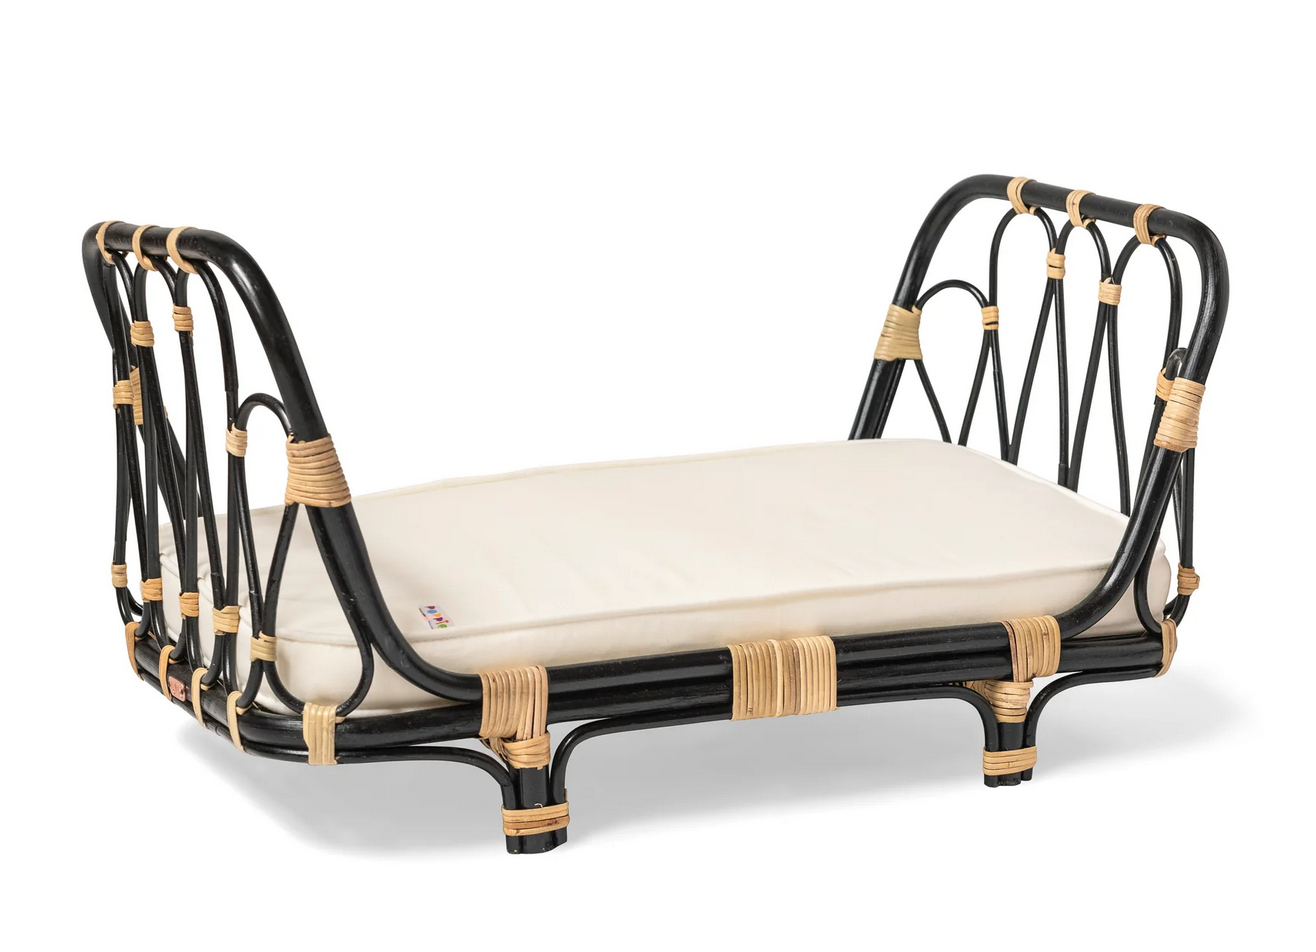 Poppie Toys Rattan Doll Daybed - Black Edition